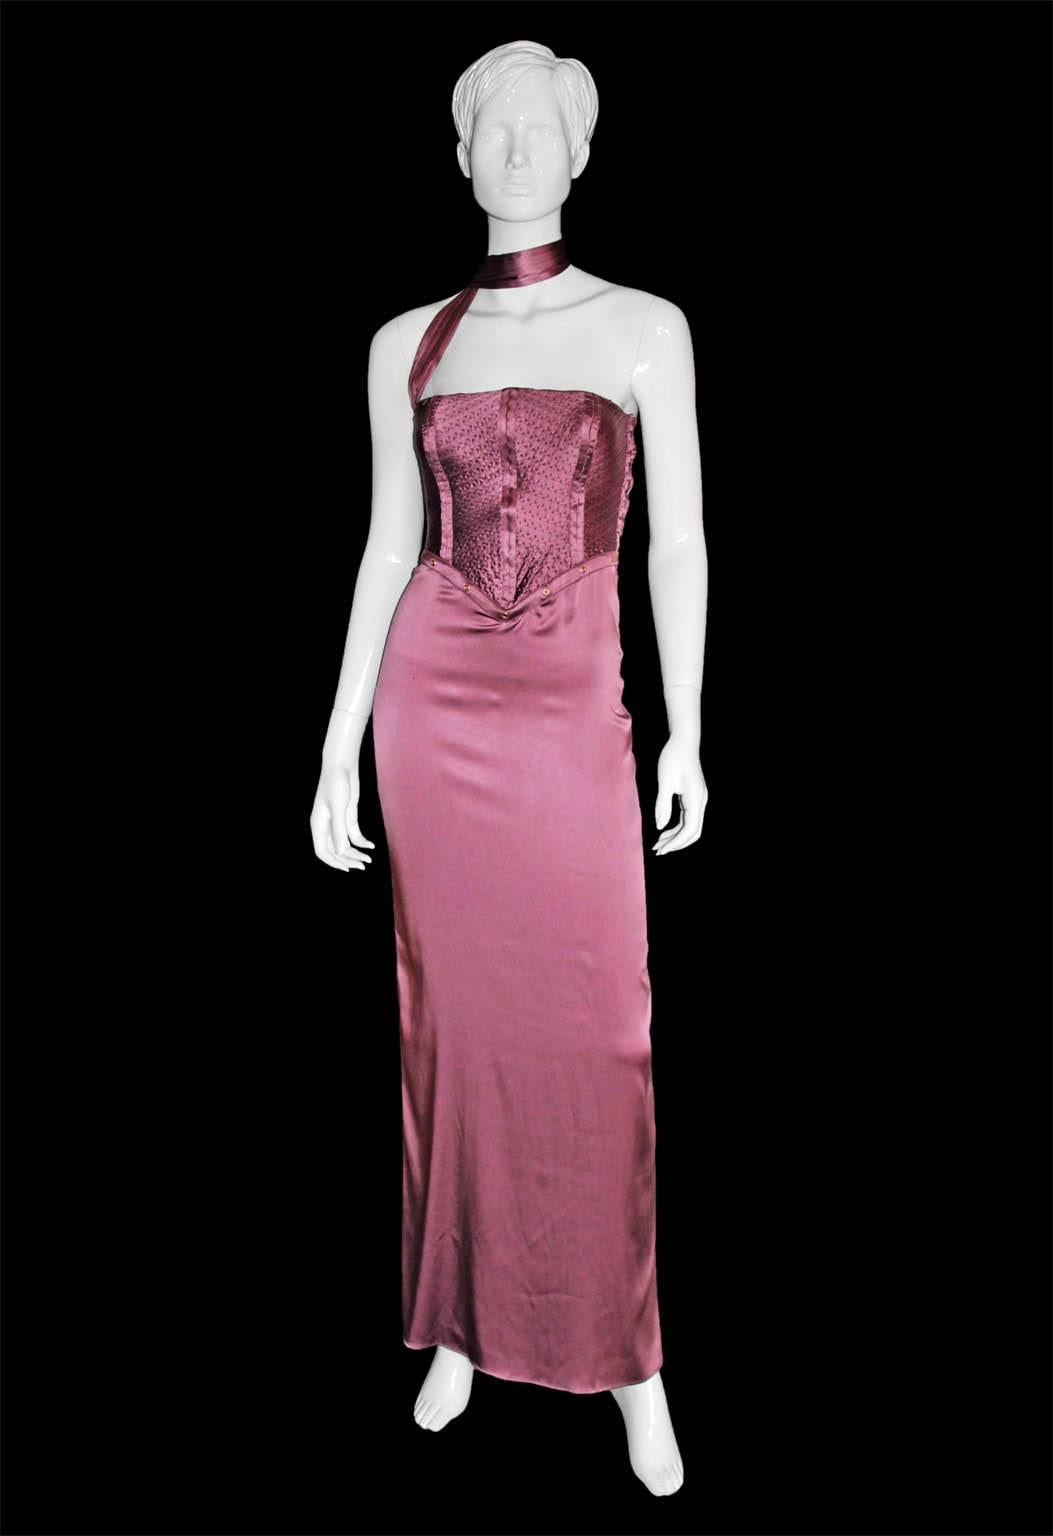 Rare & Iconic Tom Ford For Gucci Fall Winter 2003 Rose Coloured Silk Runway & Ad Campaign Corseted Gown!

Considered by many to be his greatest collection of all, Tom Ford's fall winter 2003 collection for Gucci was simply awash with the most